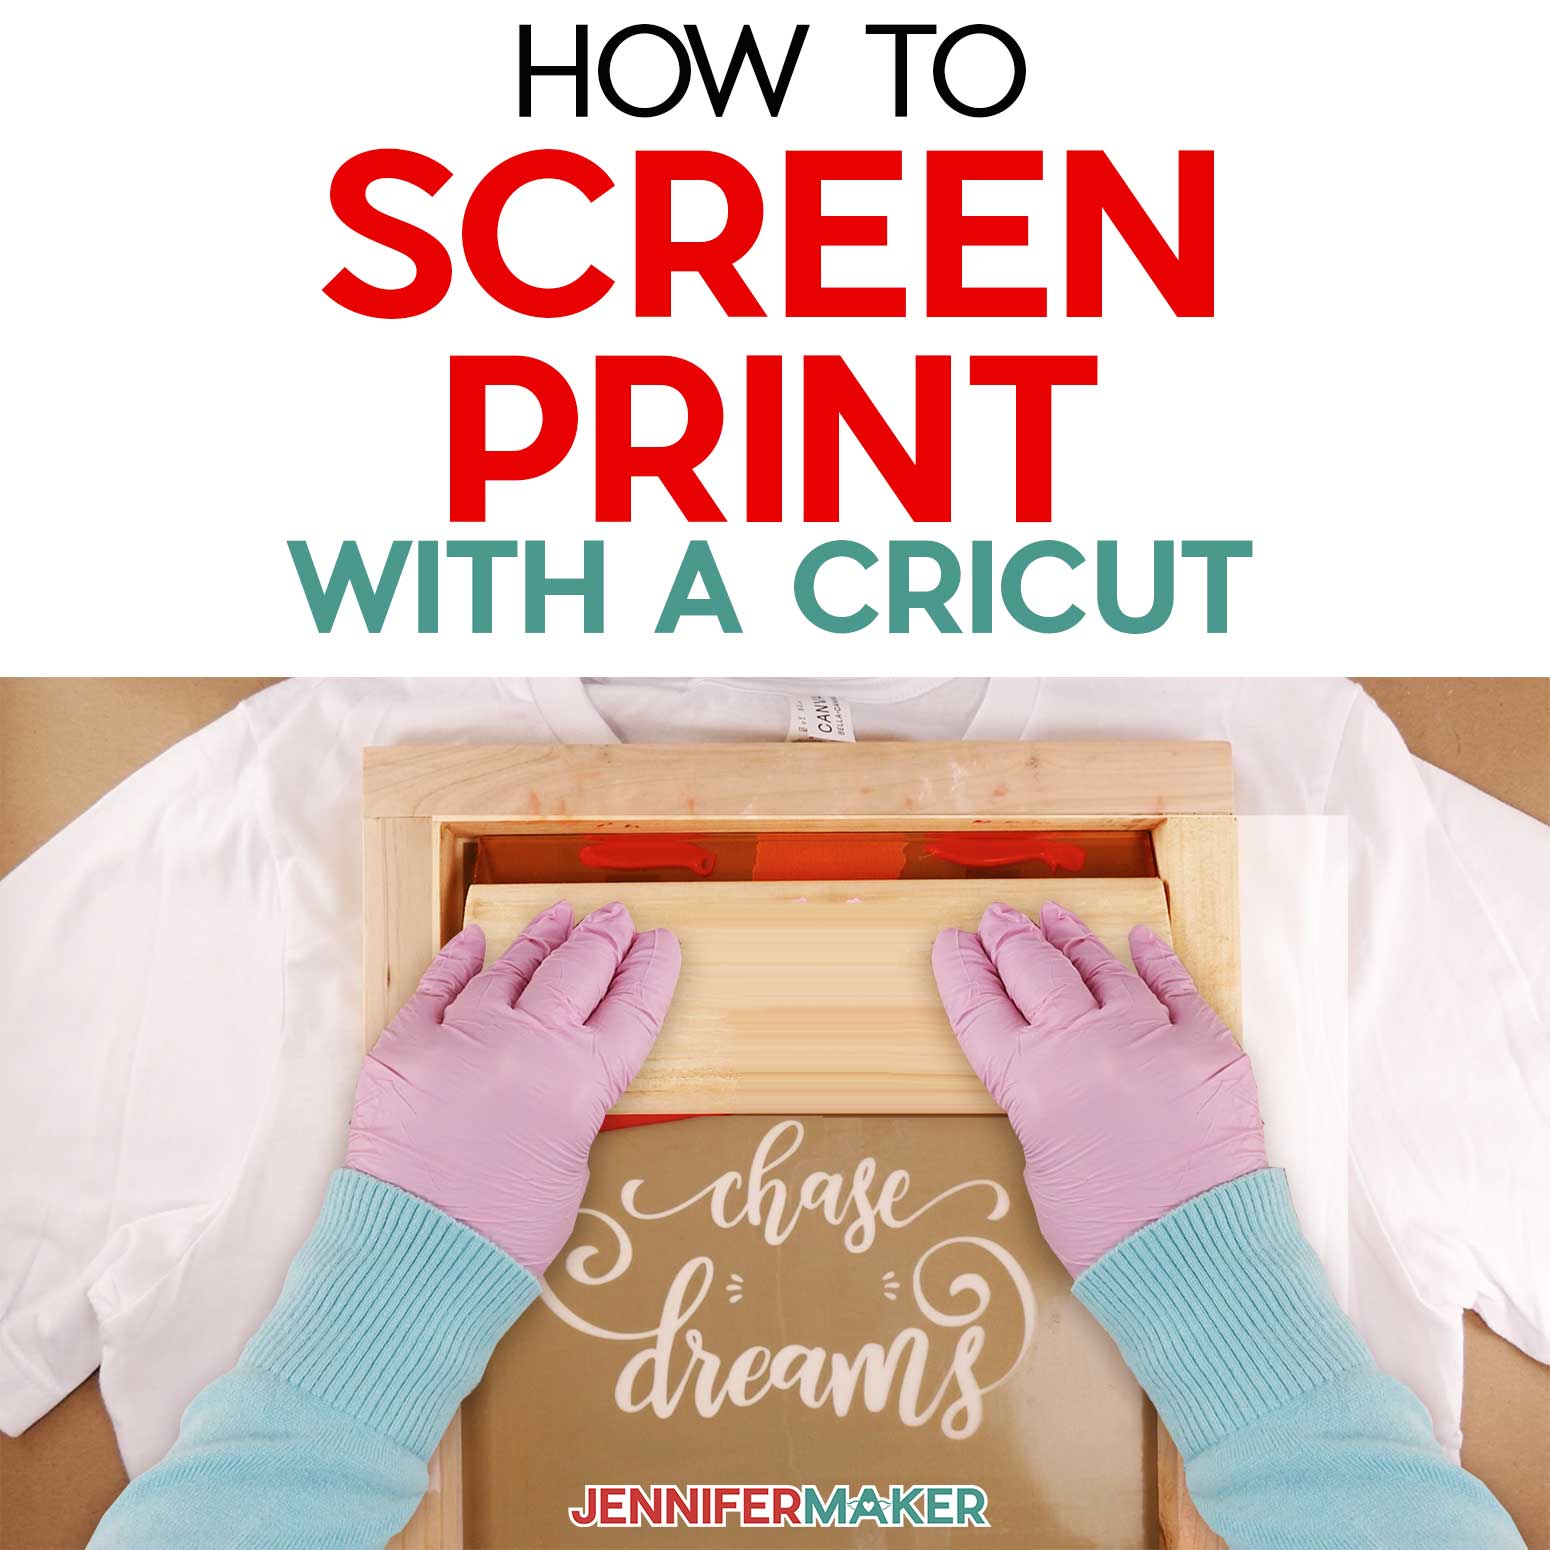 Tutorial for how to screen print a shirt with Cricut machines.